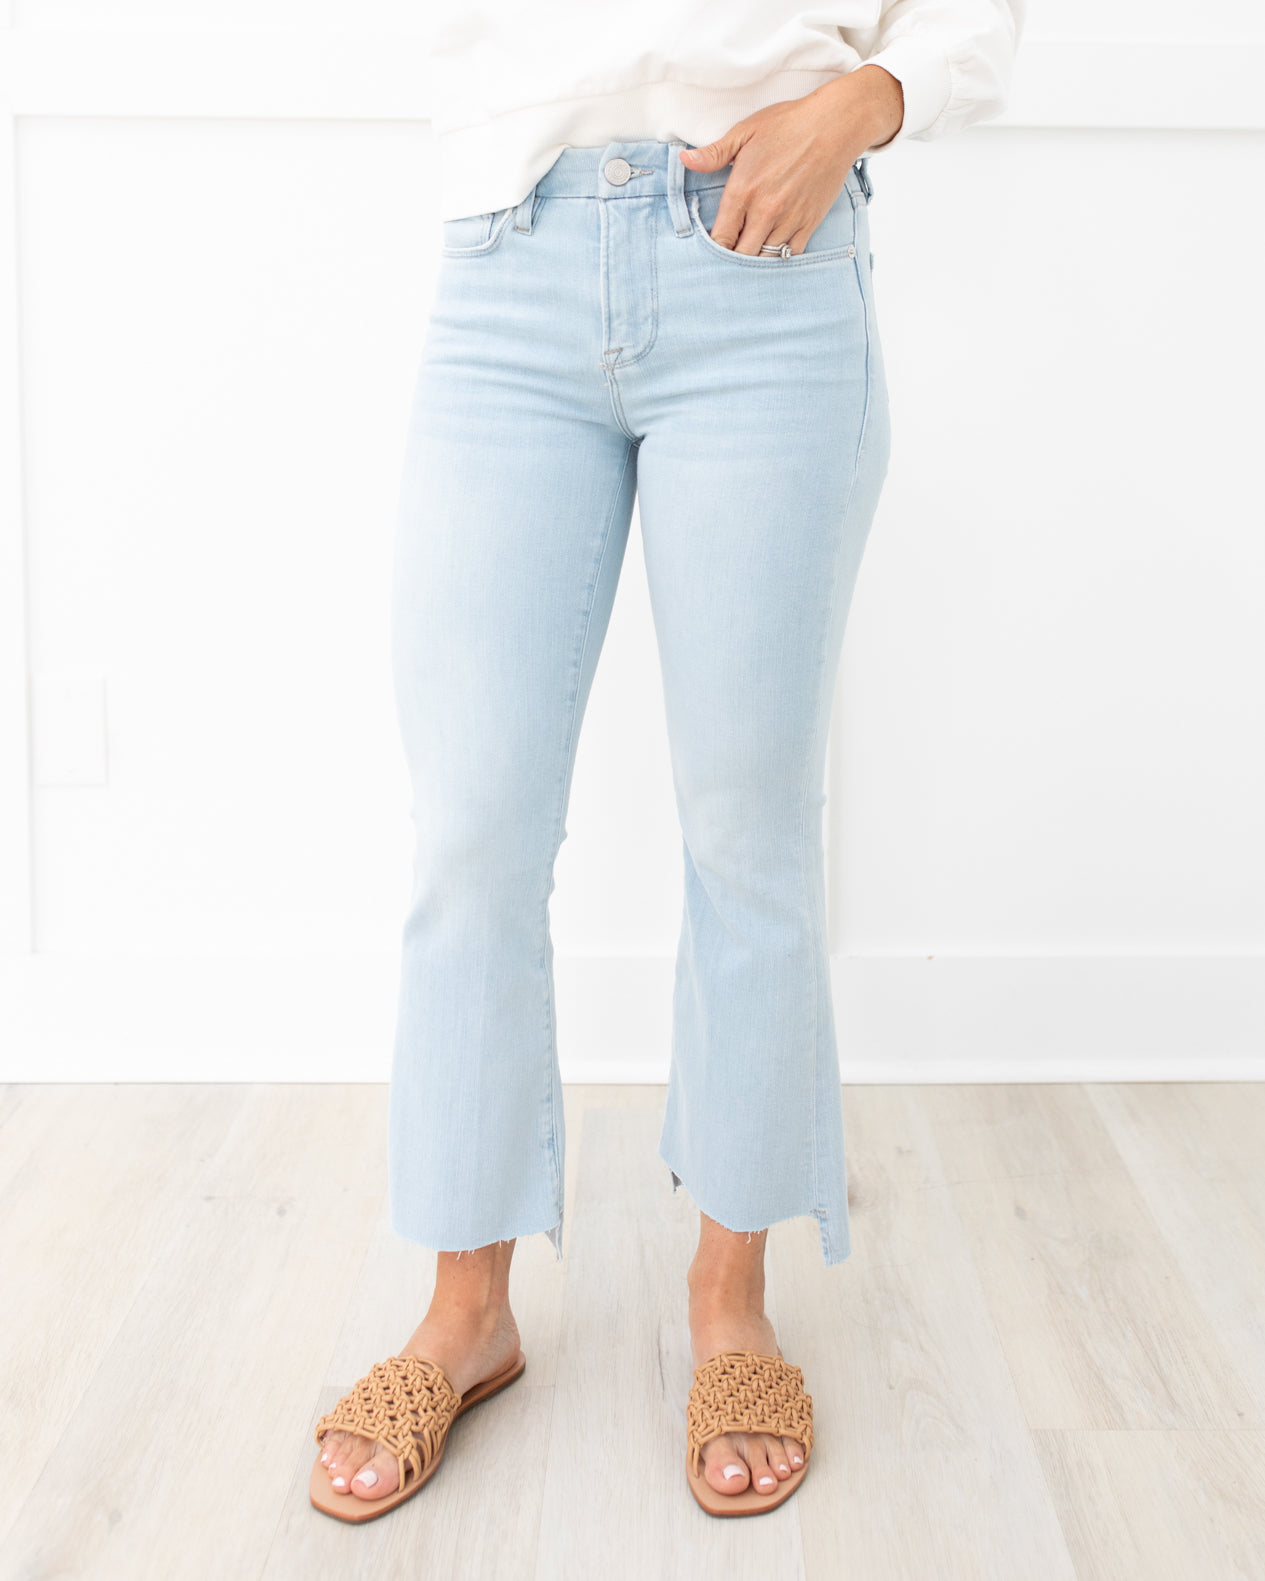 Le Crop Mini Boot High-Rise Boot-Cut Jeans in Light Wash